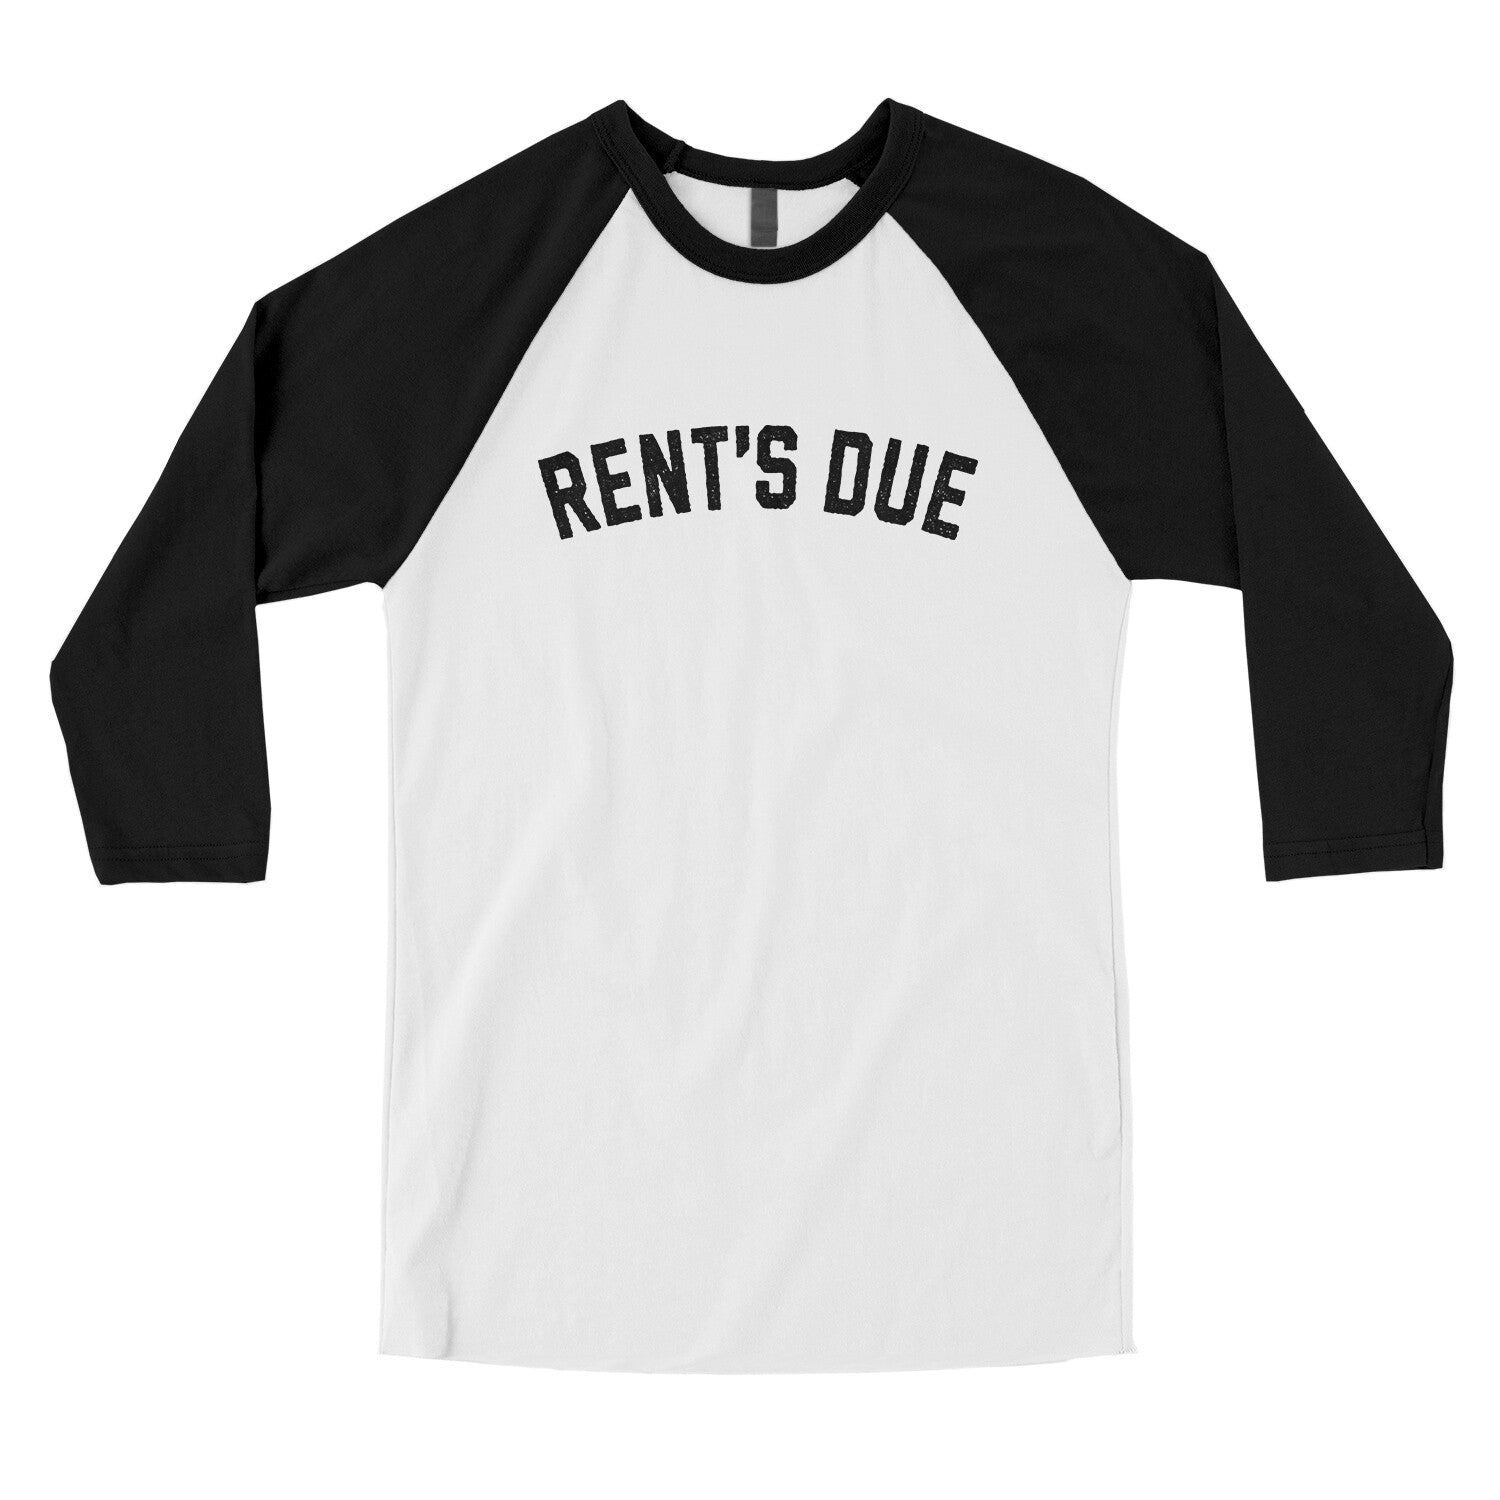 Rent's Due in White with Black Color